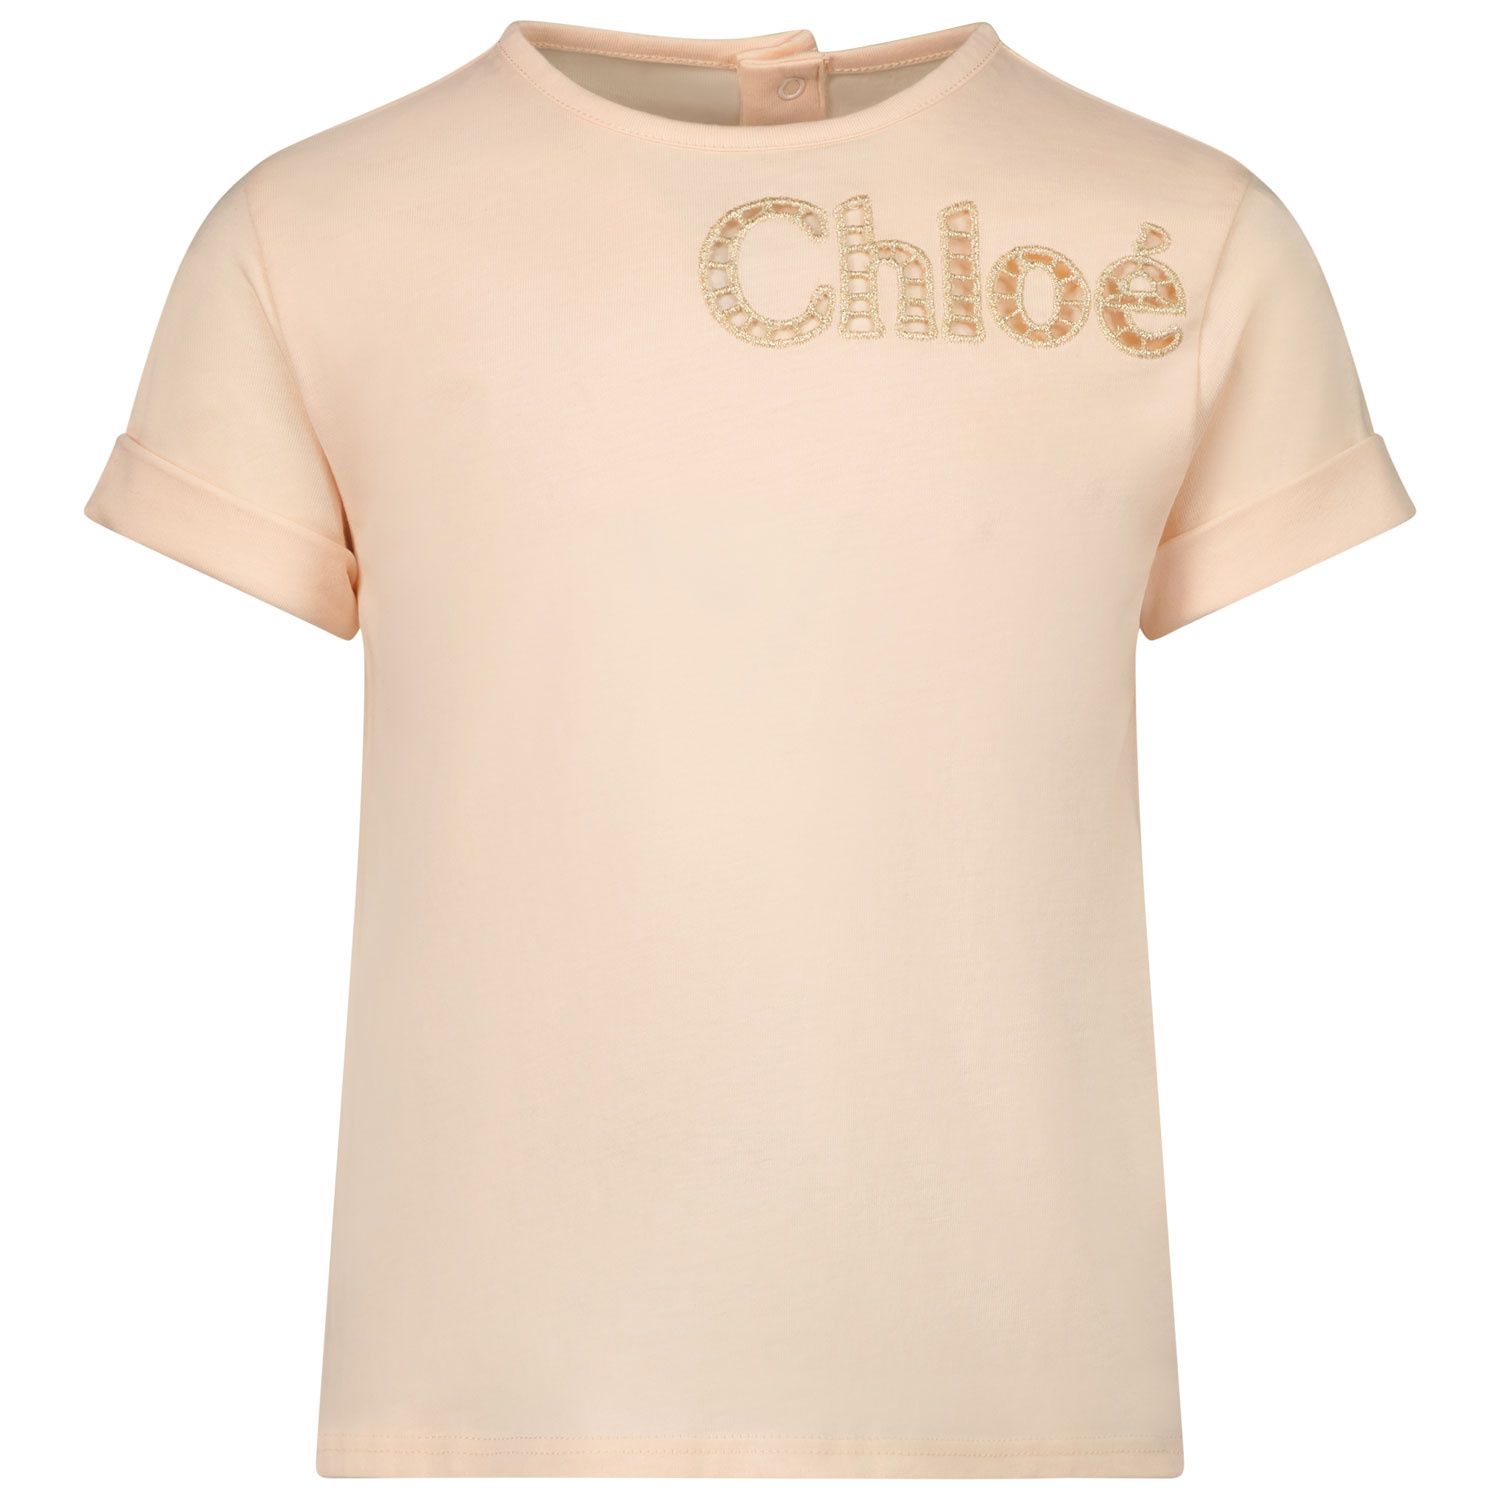 Picture of Chloe C05405 baby shirt light pink